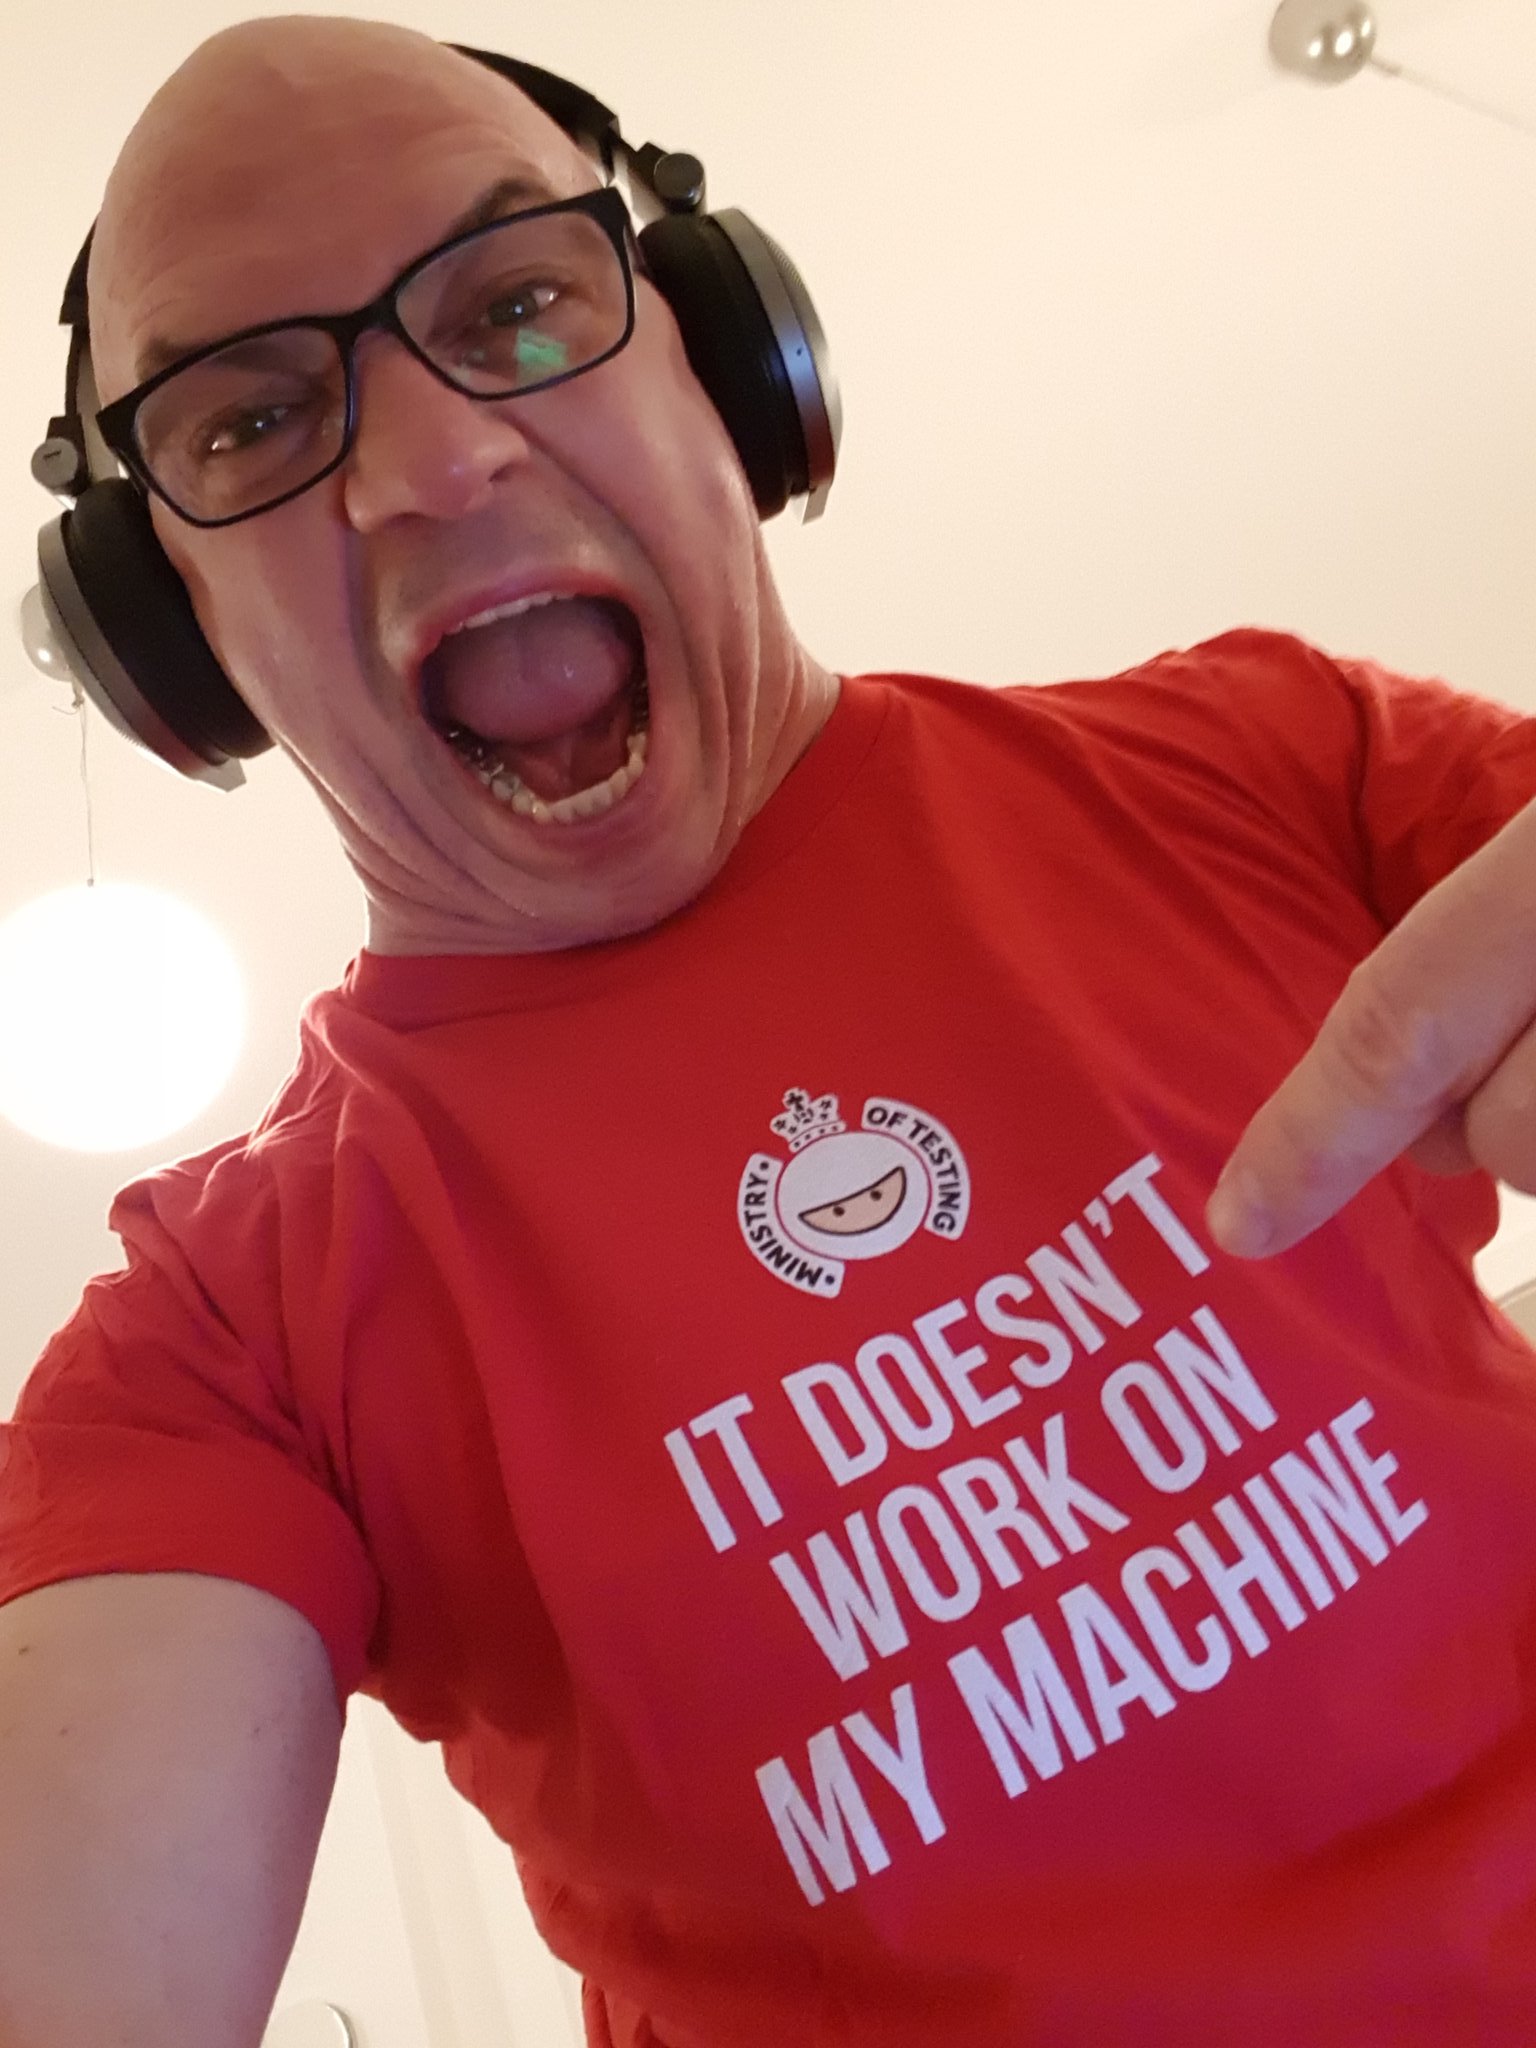 Angy Tester with T-Shirt: It doesn’t work on my machine